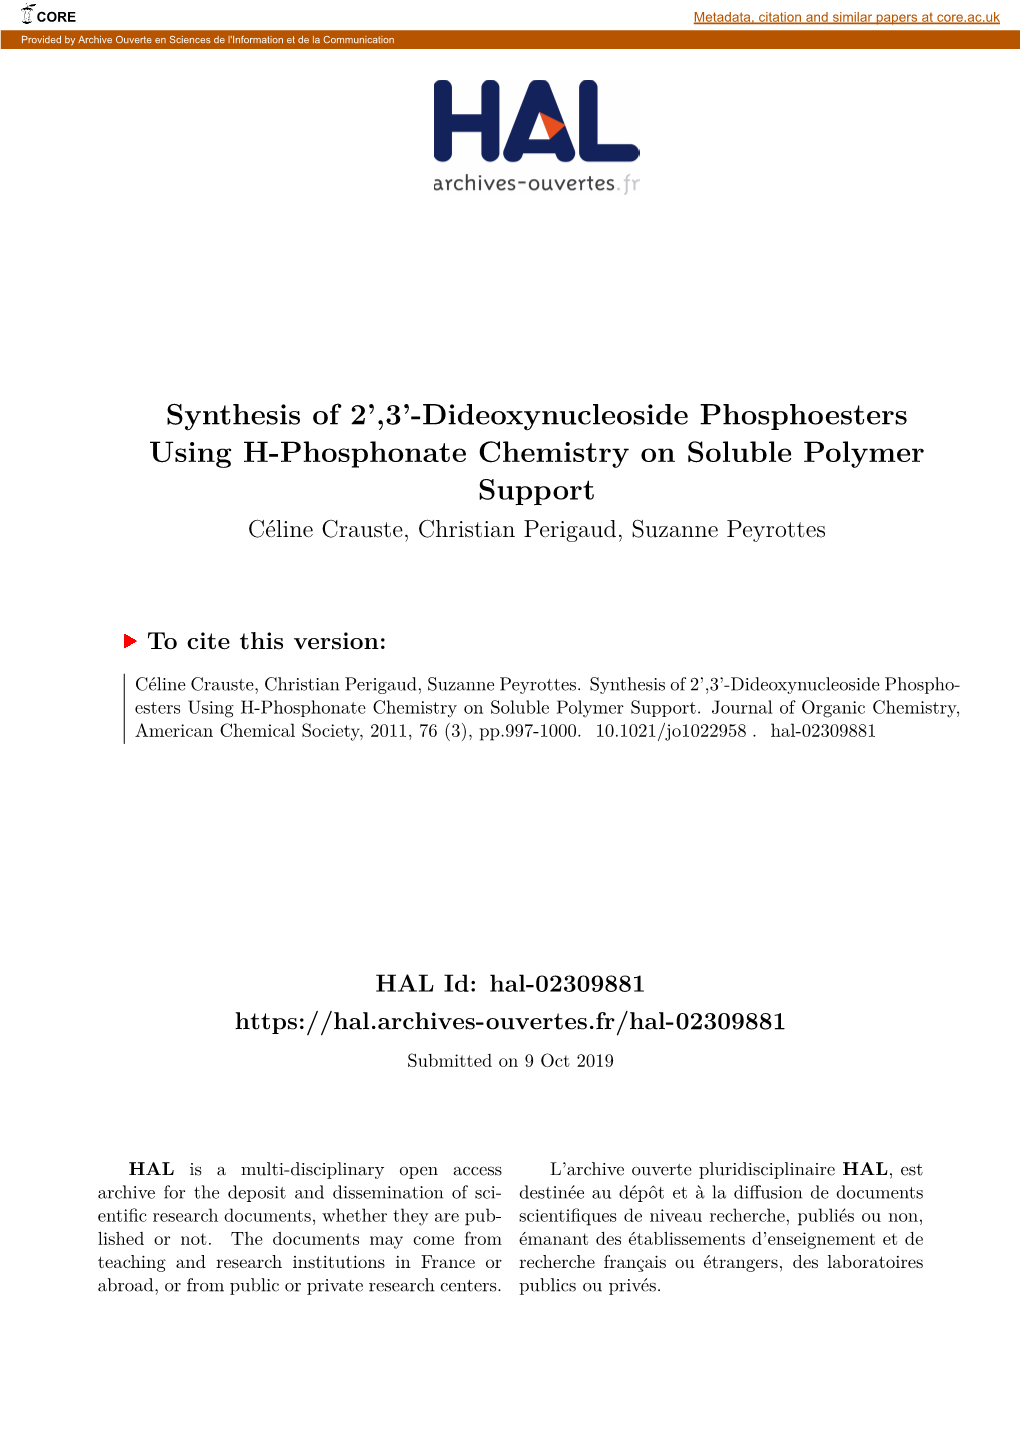 Synthesis of 2',3'-Dideoxynucleoside Phosphoesters Using H